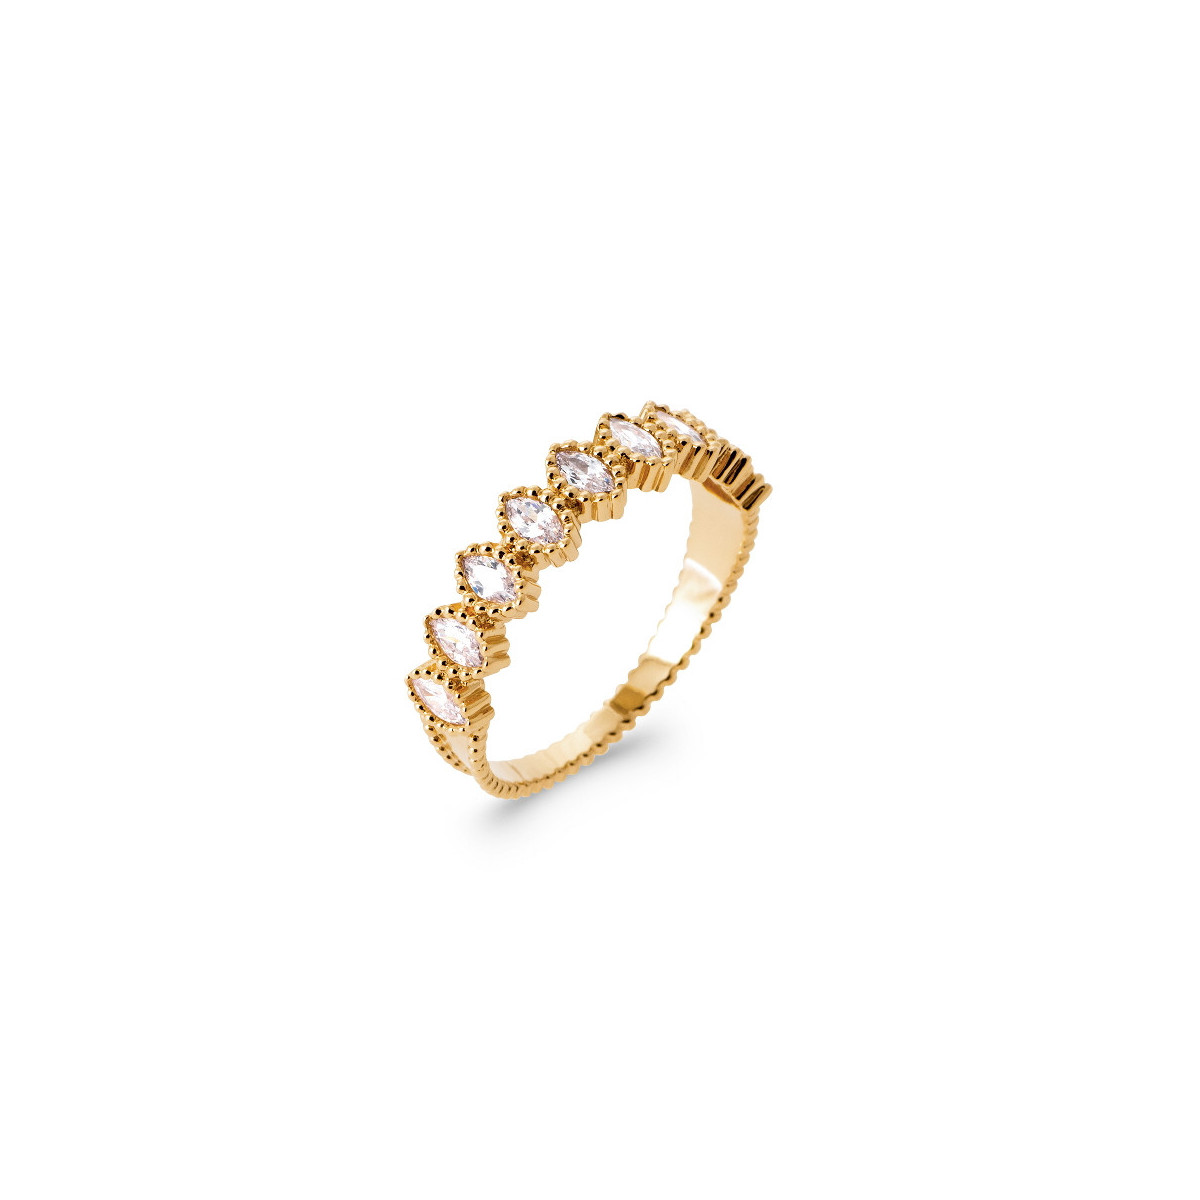 RING WITH MARQUISE-CUT ZIRCONIA